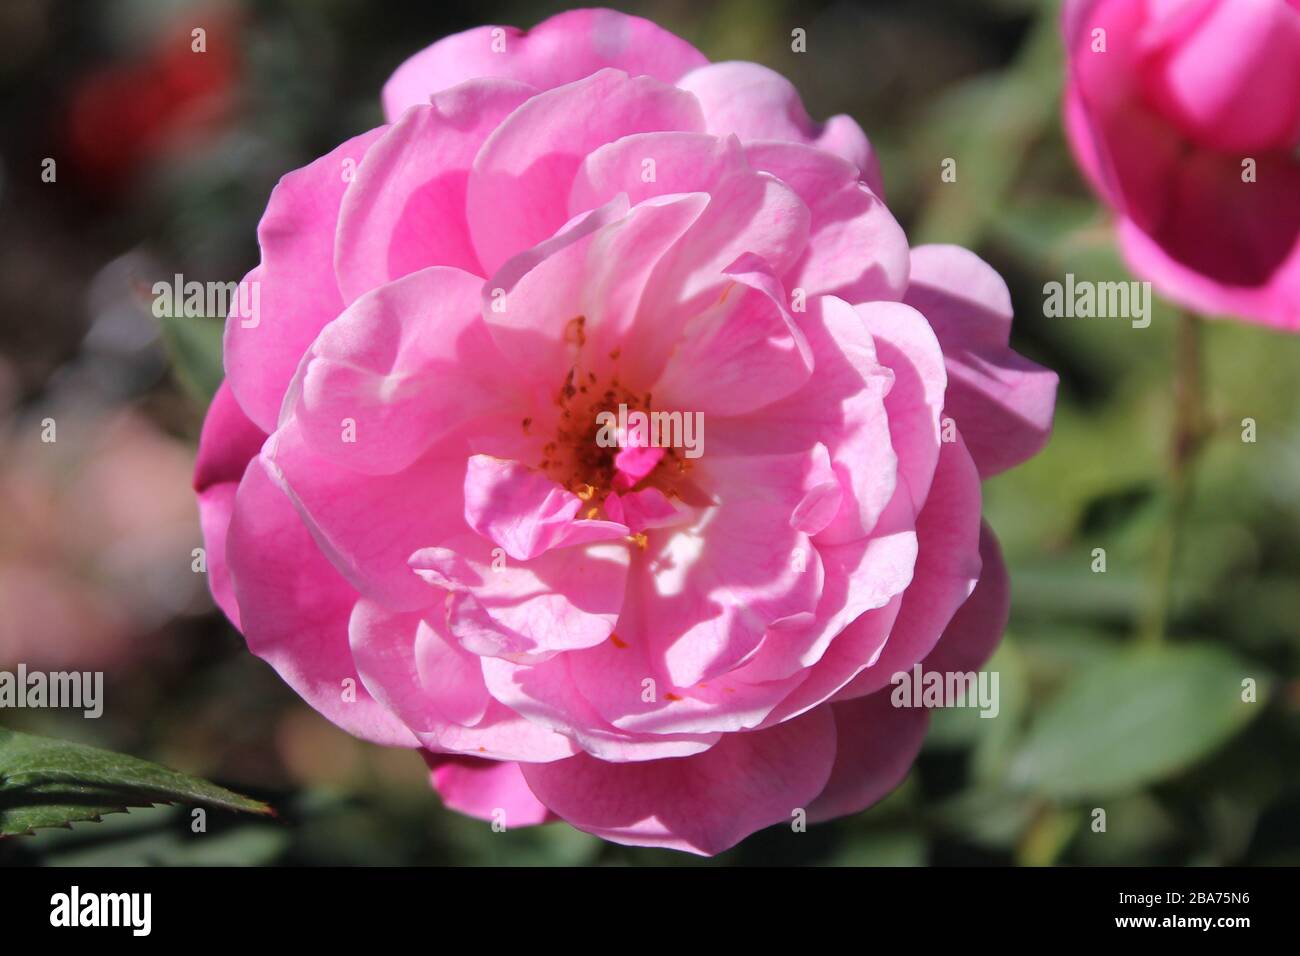 Coral rose flower in roses garden. Top view. Soft focus. Stock Photo